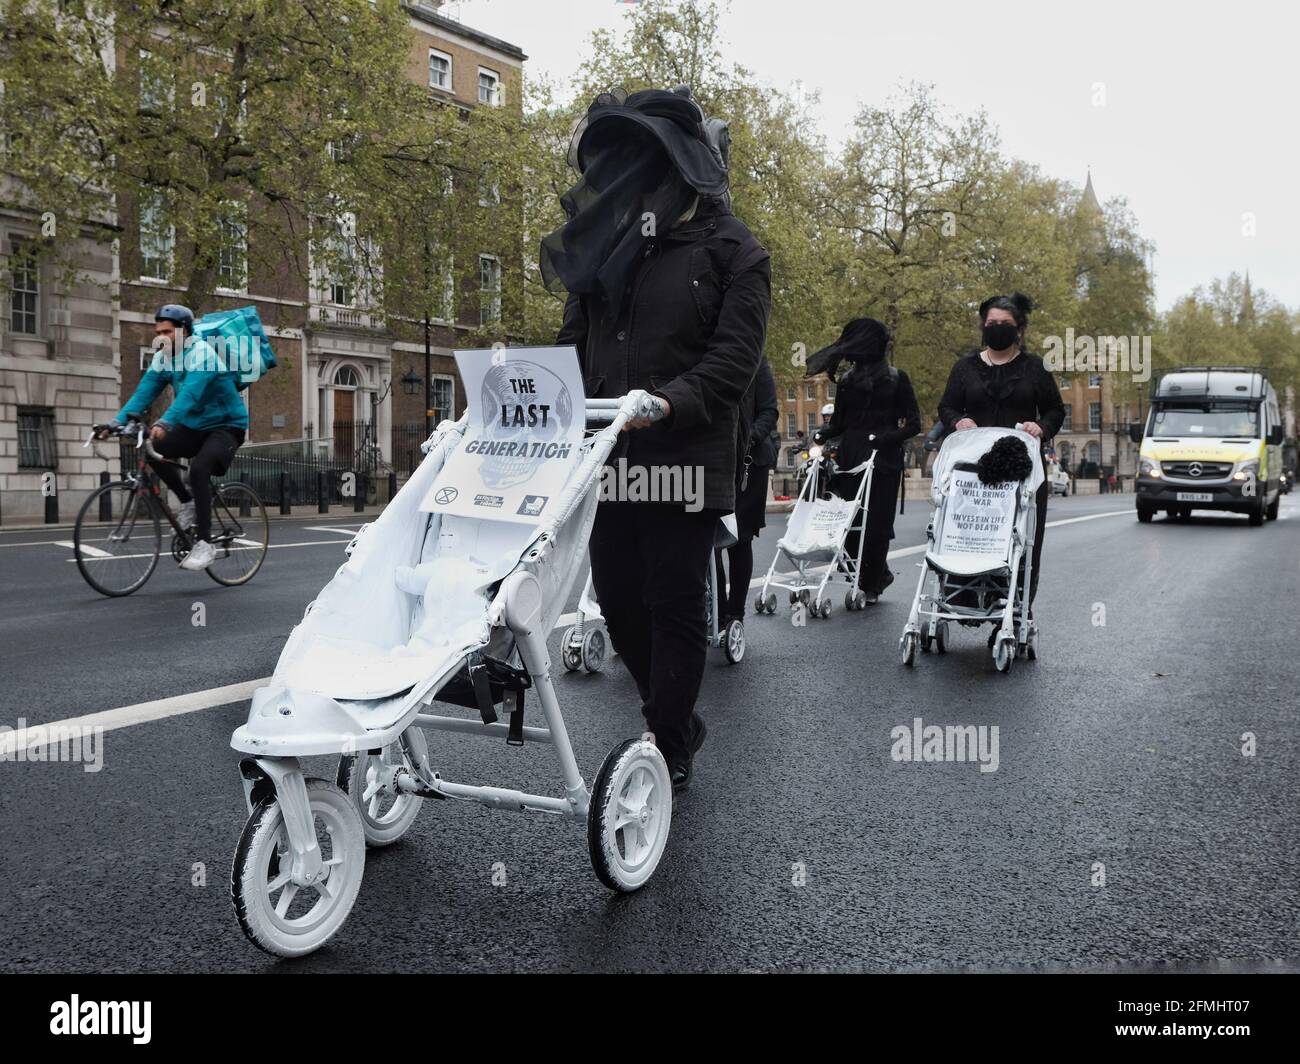 Extinction Rebellion stage a demonstration in central London to highlight government inaction over climate change failing children. Stock Photo